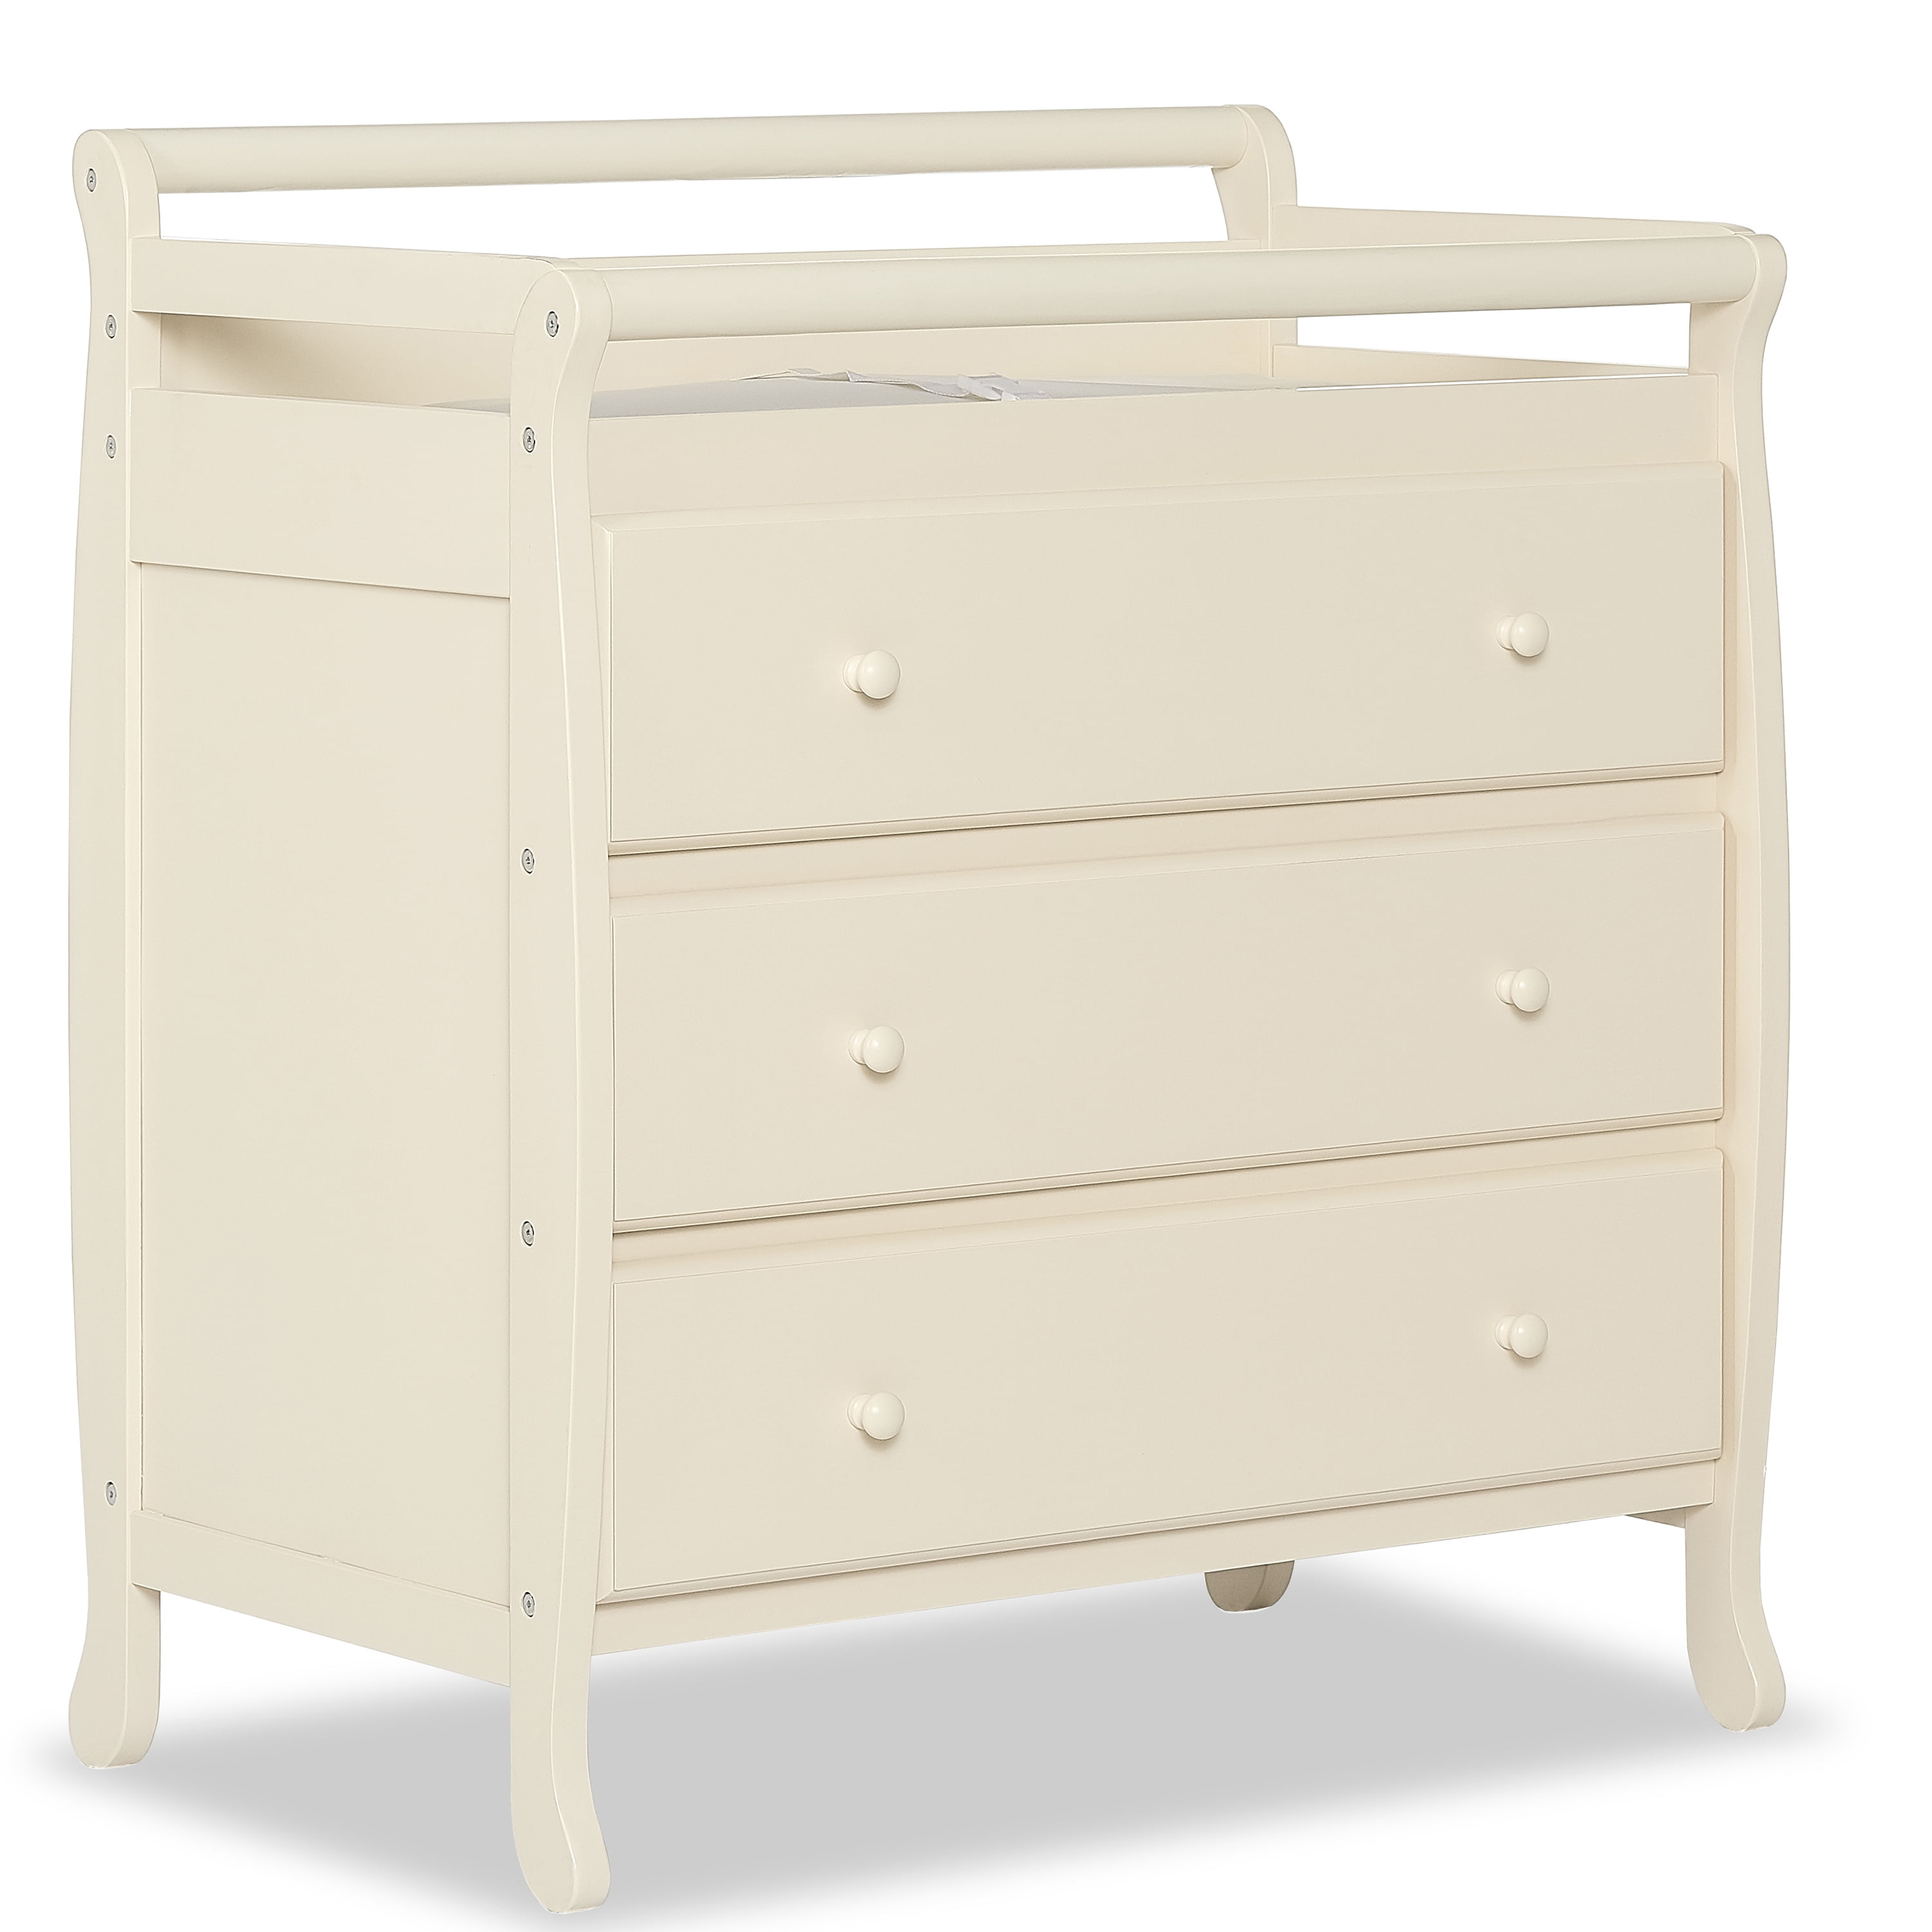 Dream On Me Liberty 3Drawer Changing Table with Pad, French White